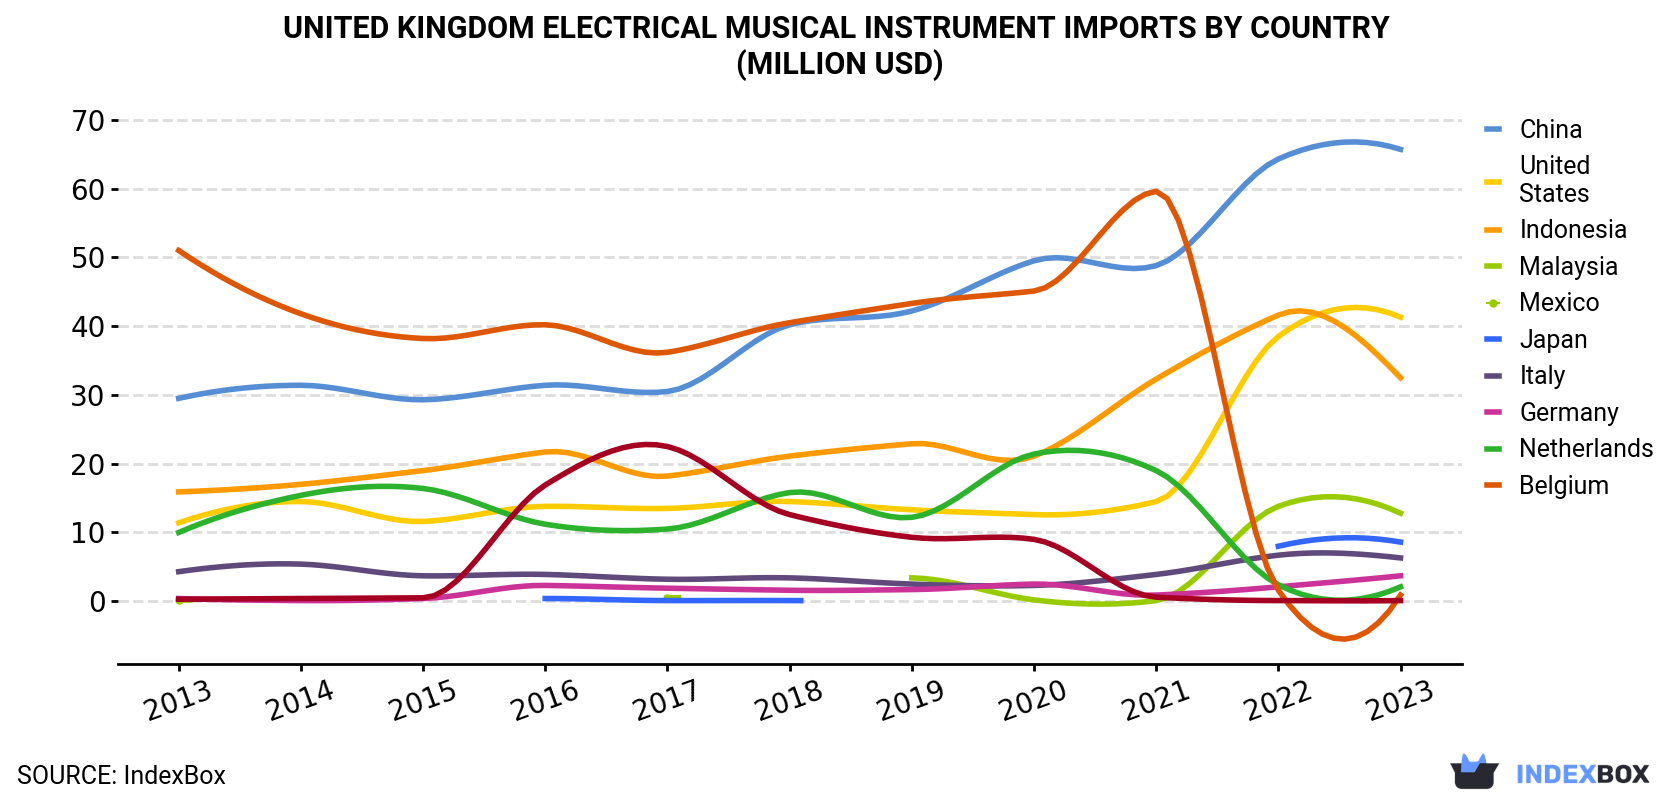 United Kingdom Electrical Musical Instrument Imports By Country (Million USD)